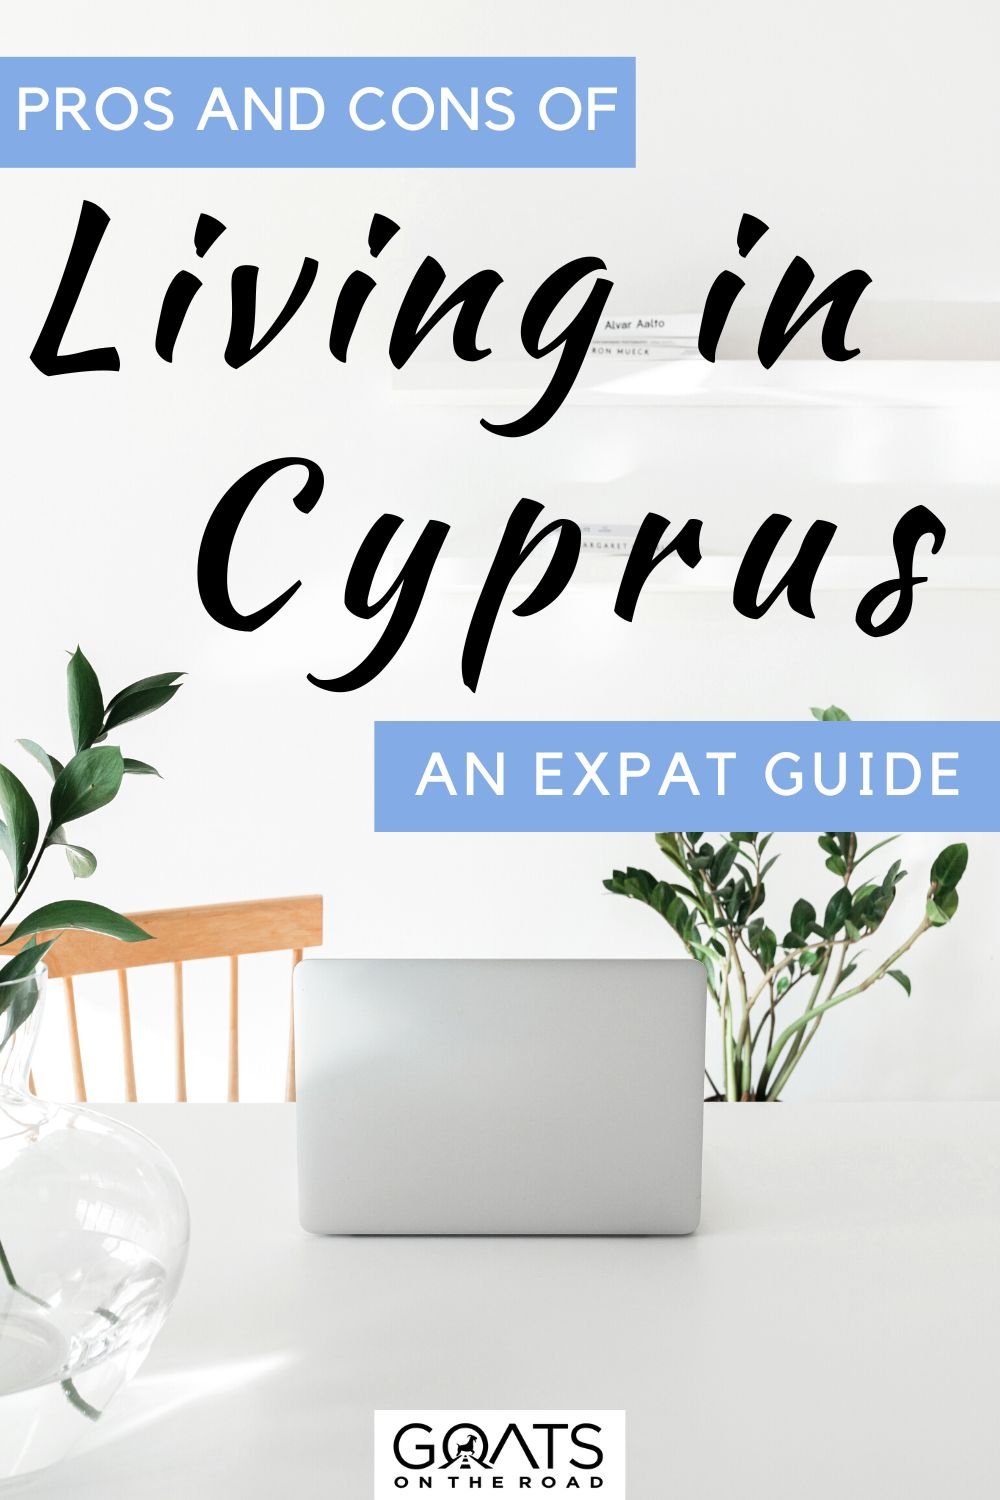 “Pros and Cons of Living in Cyprus: An Expat Guide